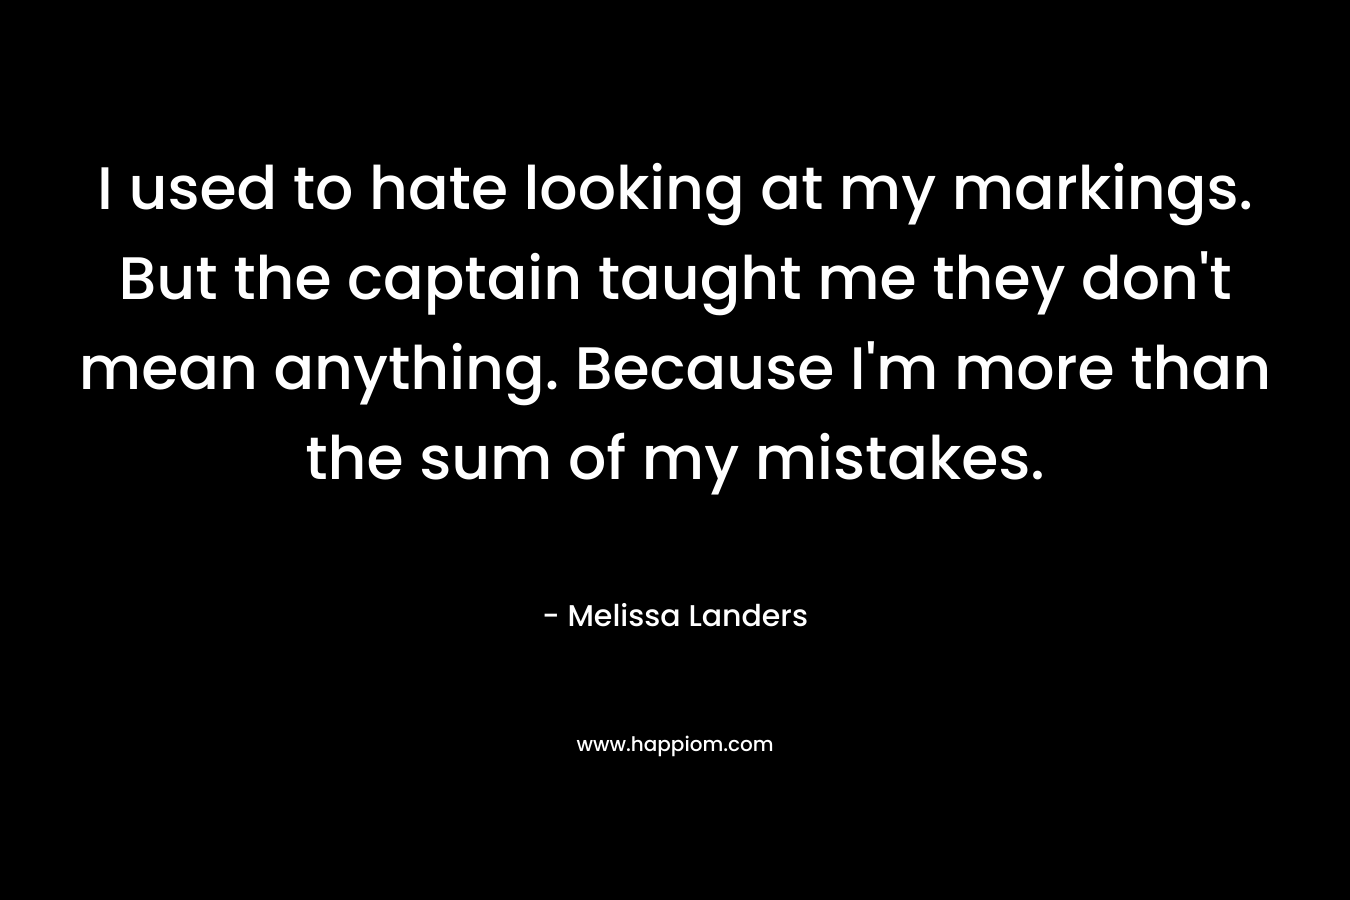 I used to hate looking at my markings. But the captain taught me they don’t mean anything. Because I’m more than the sum of my mistakes. – Melissa Landers